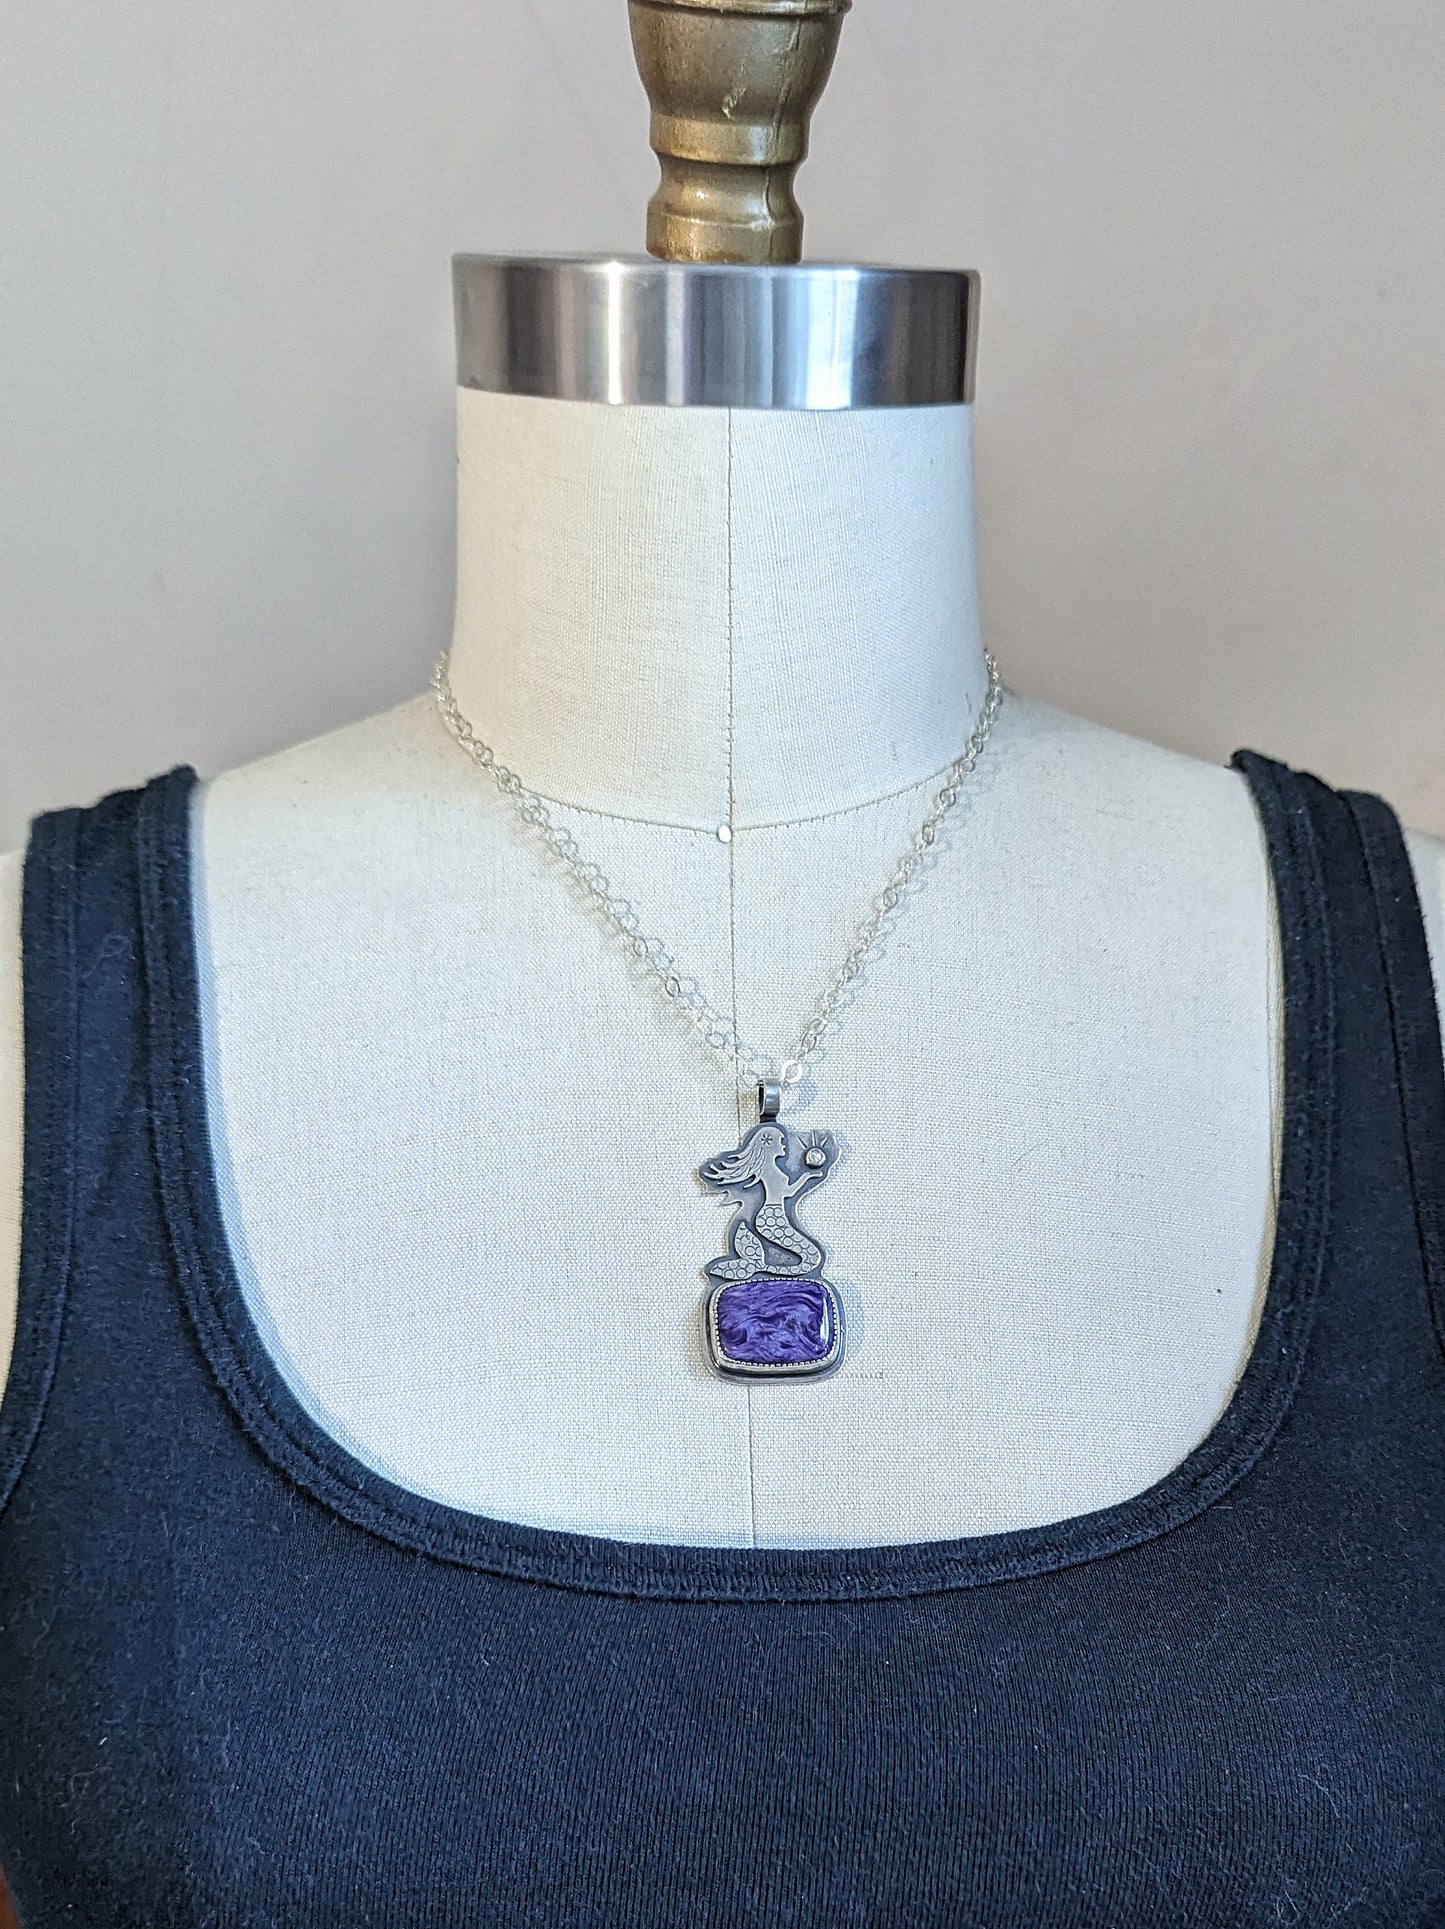 Charoite mermaid necklace on bust